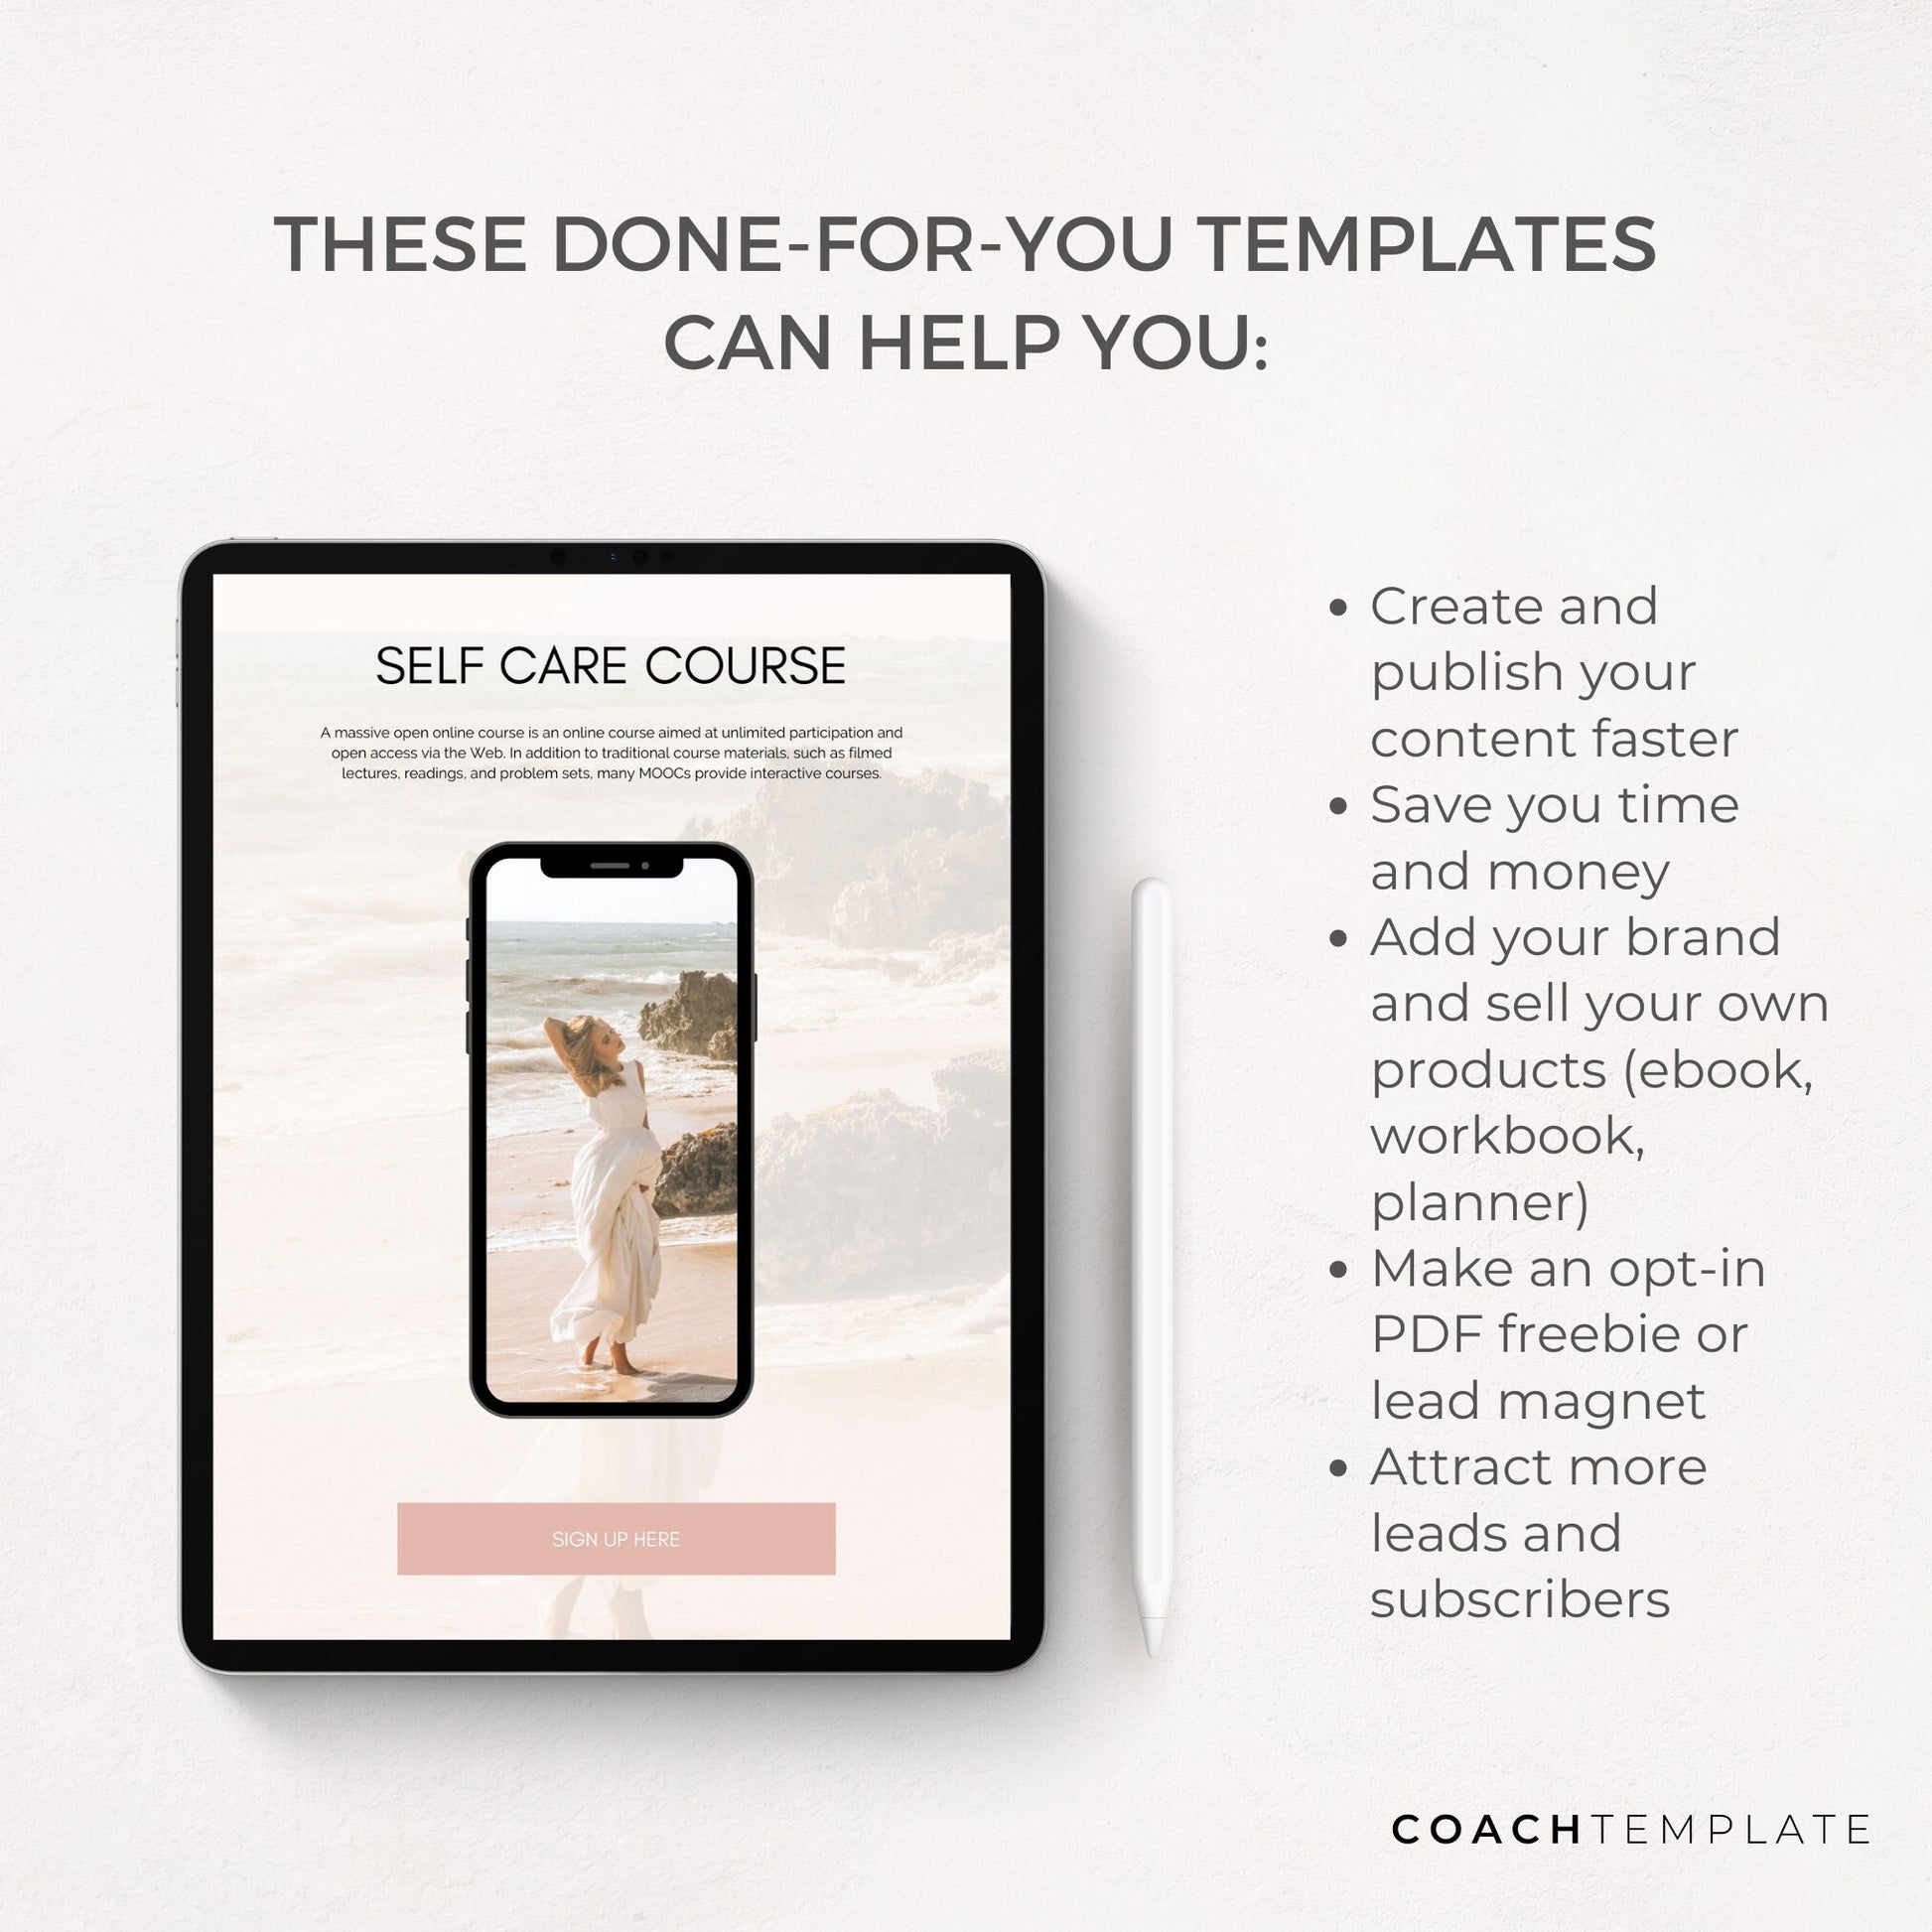 Editable Self Care Challenge Planner Journal Canva Template | Workbook Lead Magnet for Life Coach Wellness Blogger Business | Commercial Use

Self Care Challenge Planner Journal Canva Template CT036 - CoachTemplate.etsy.com